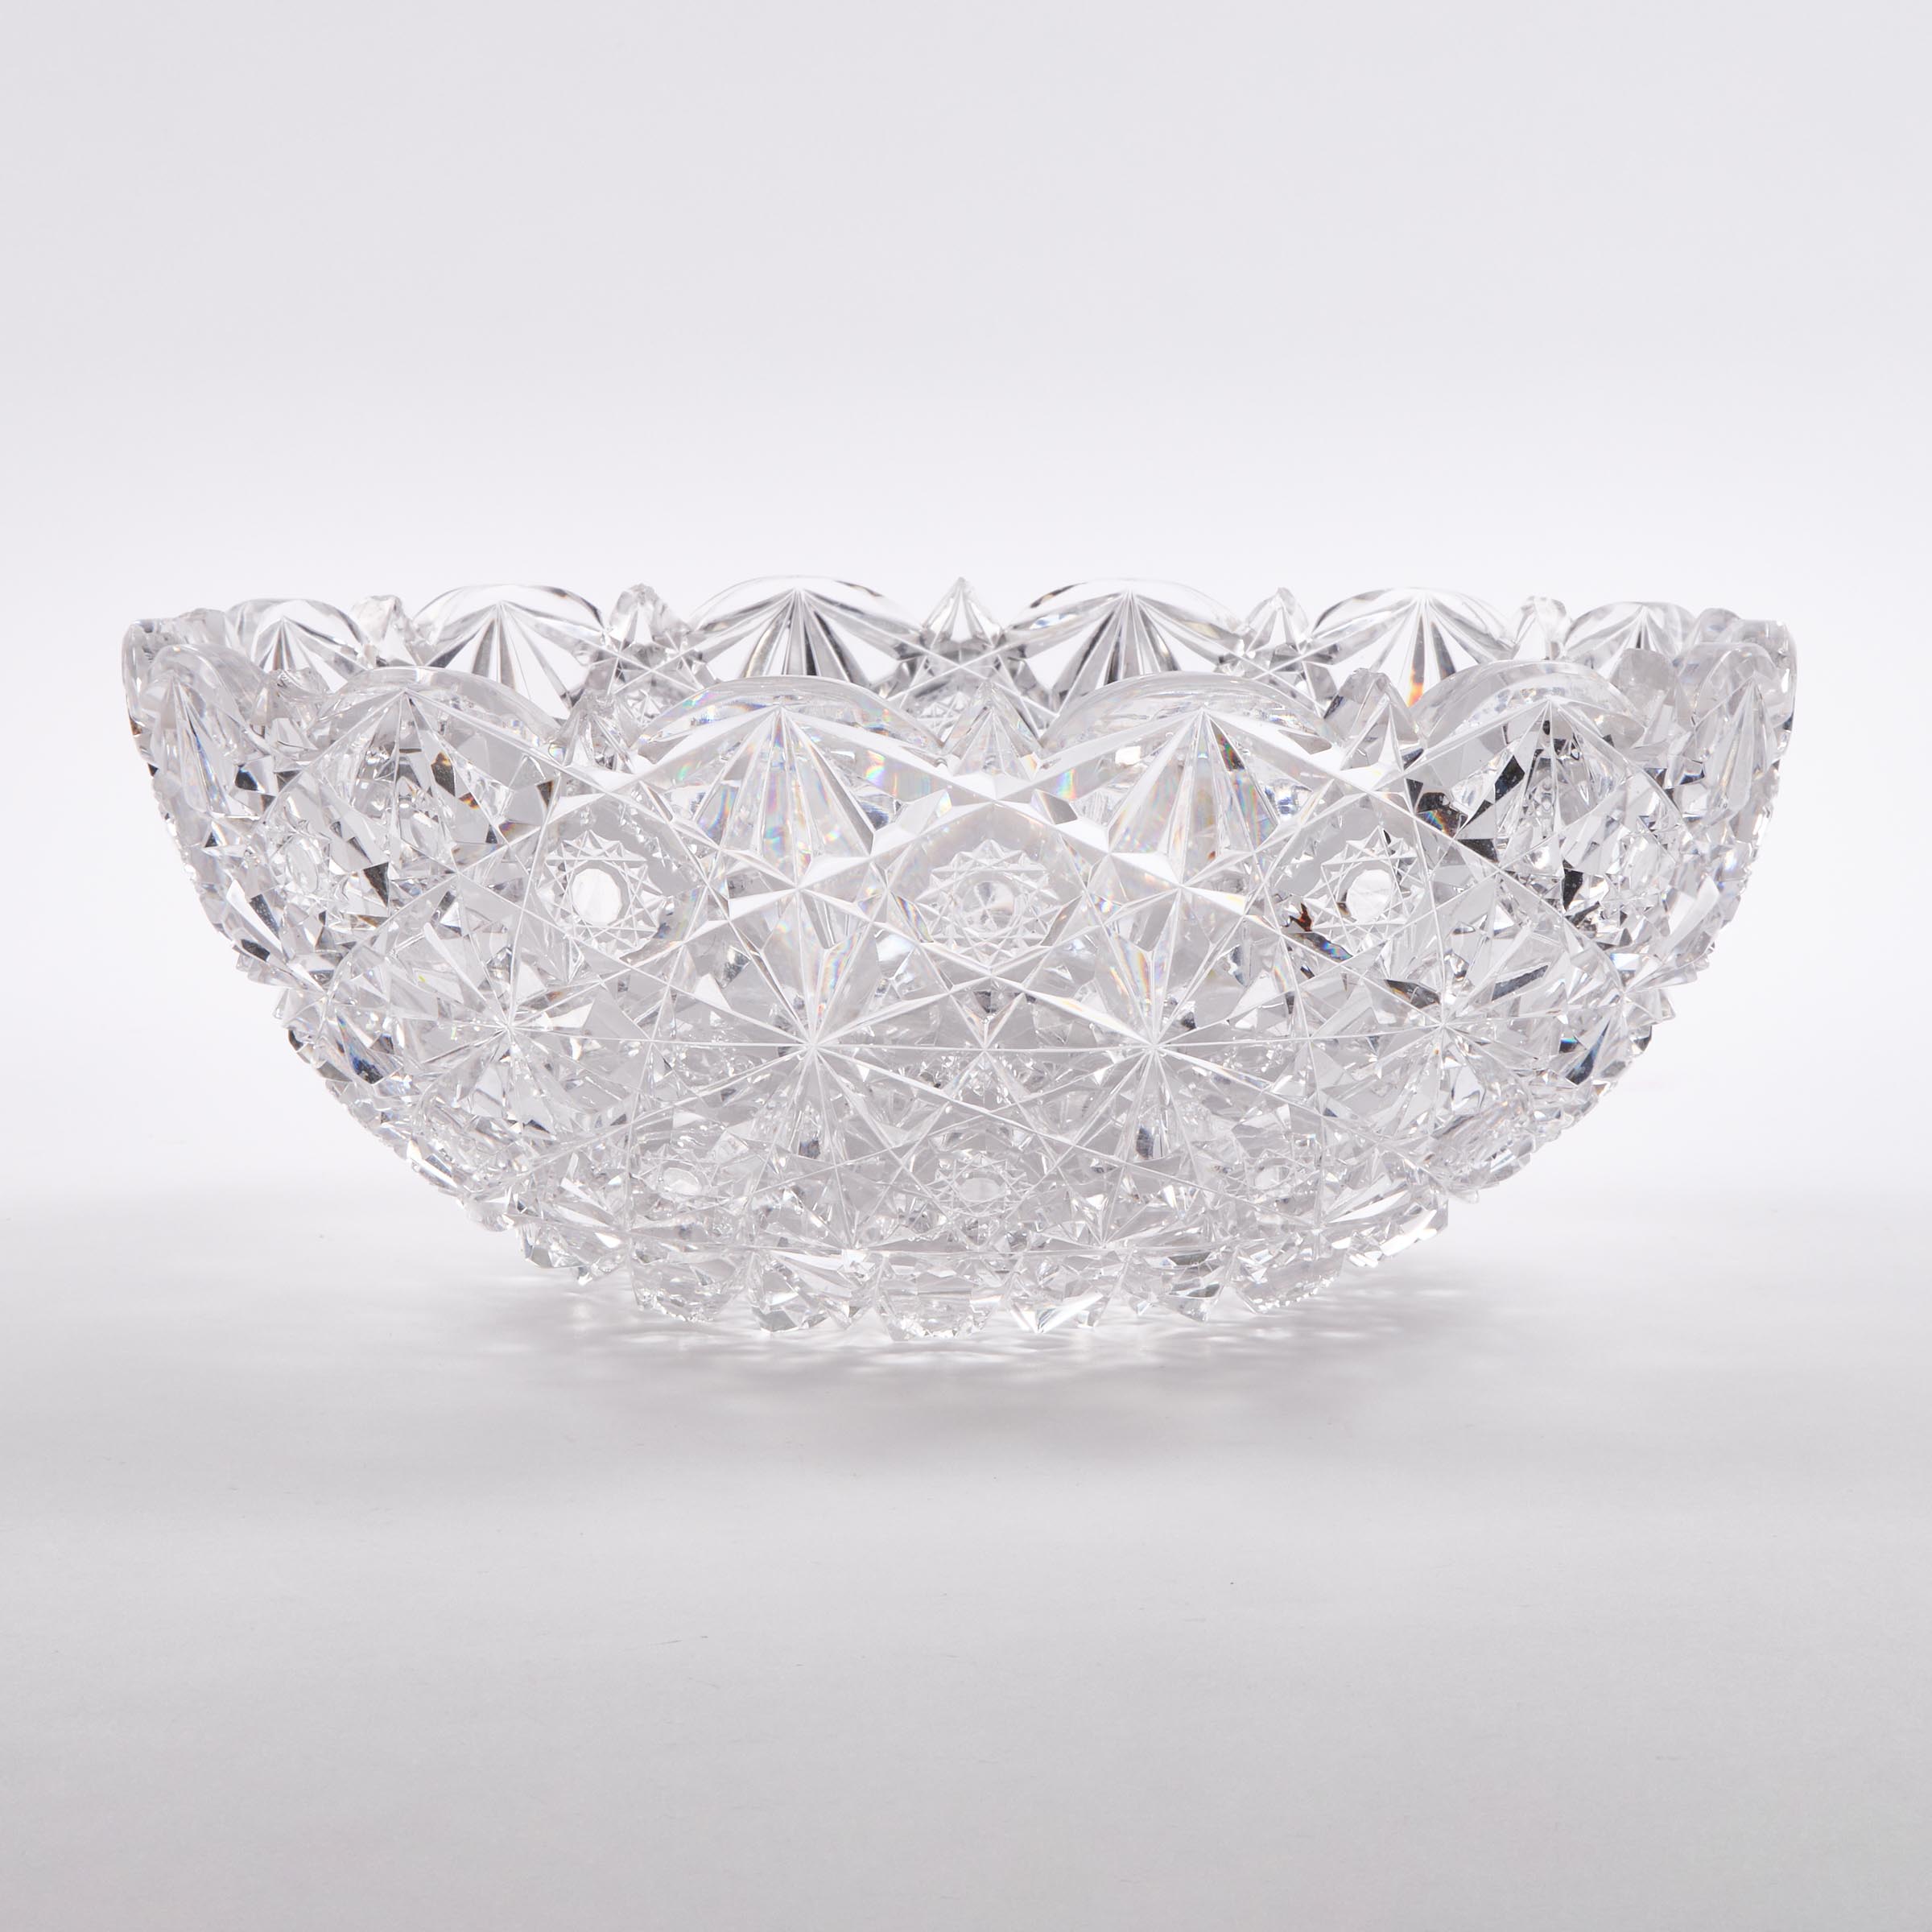 North American Cut Glass Bowl, early